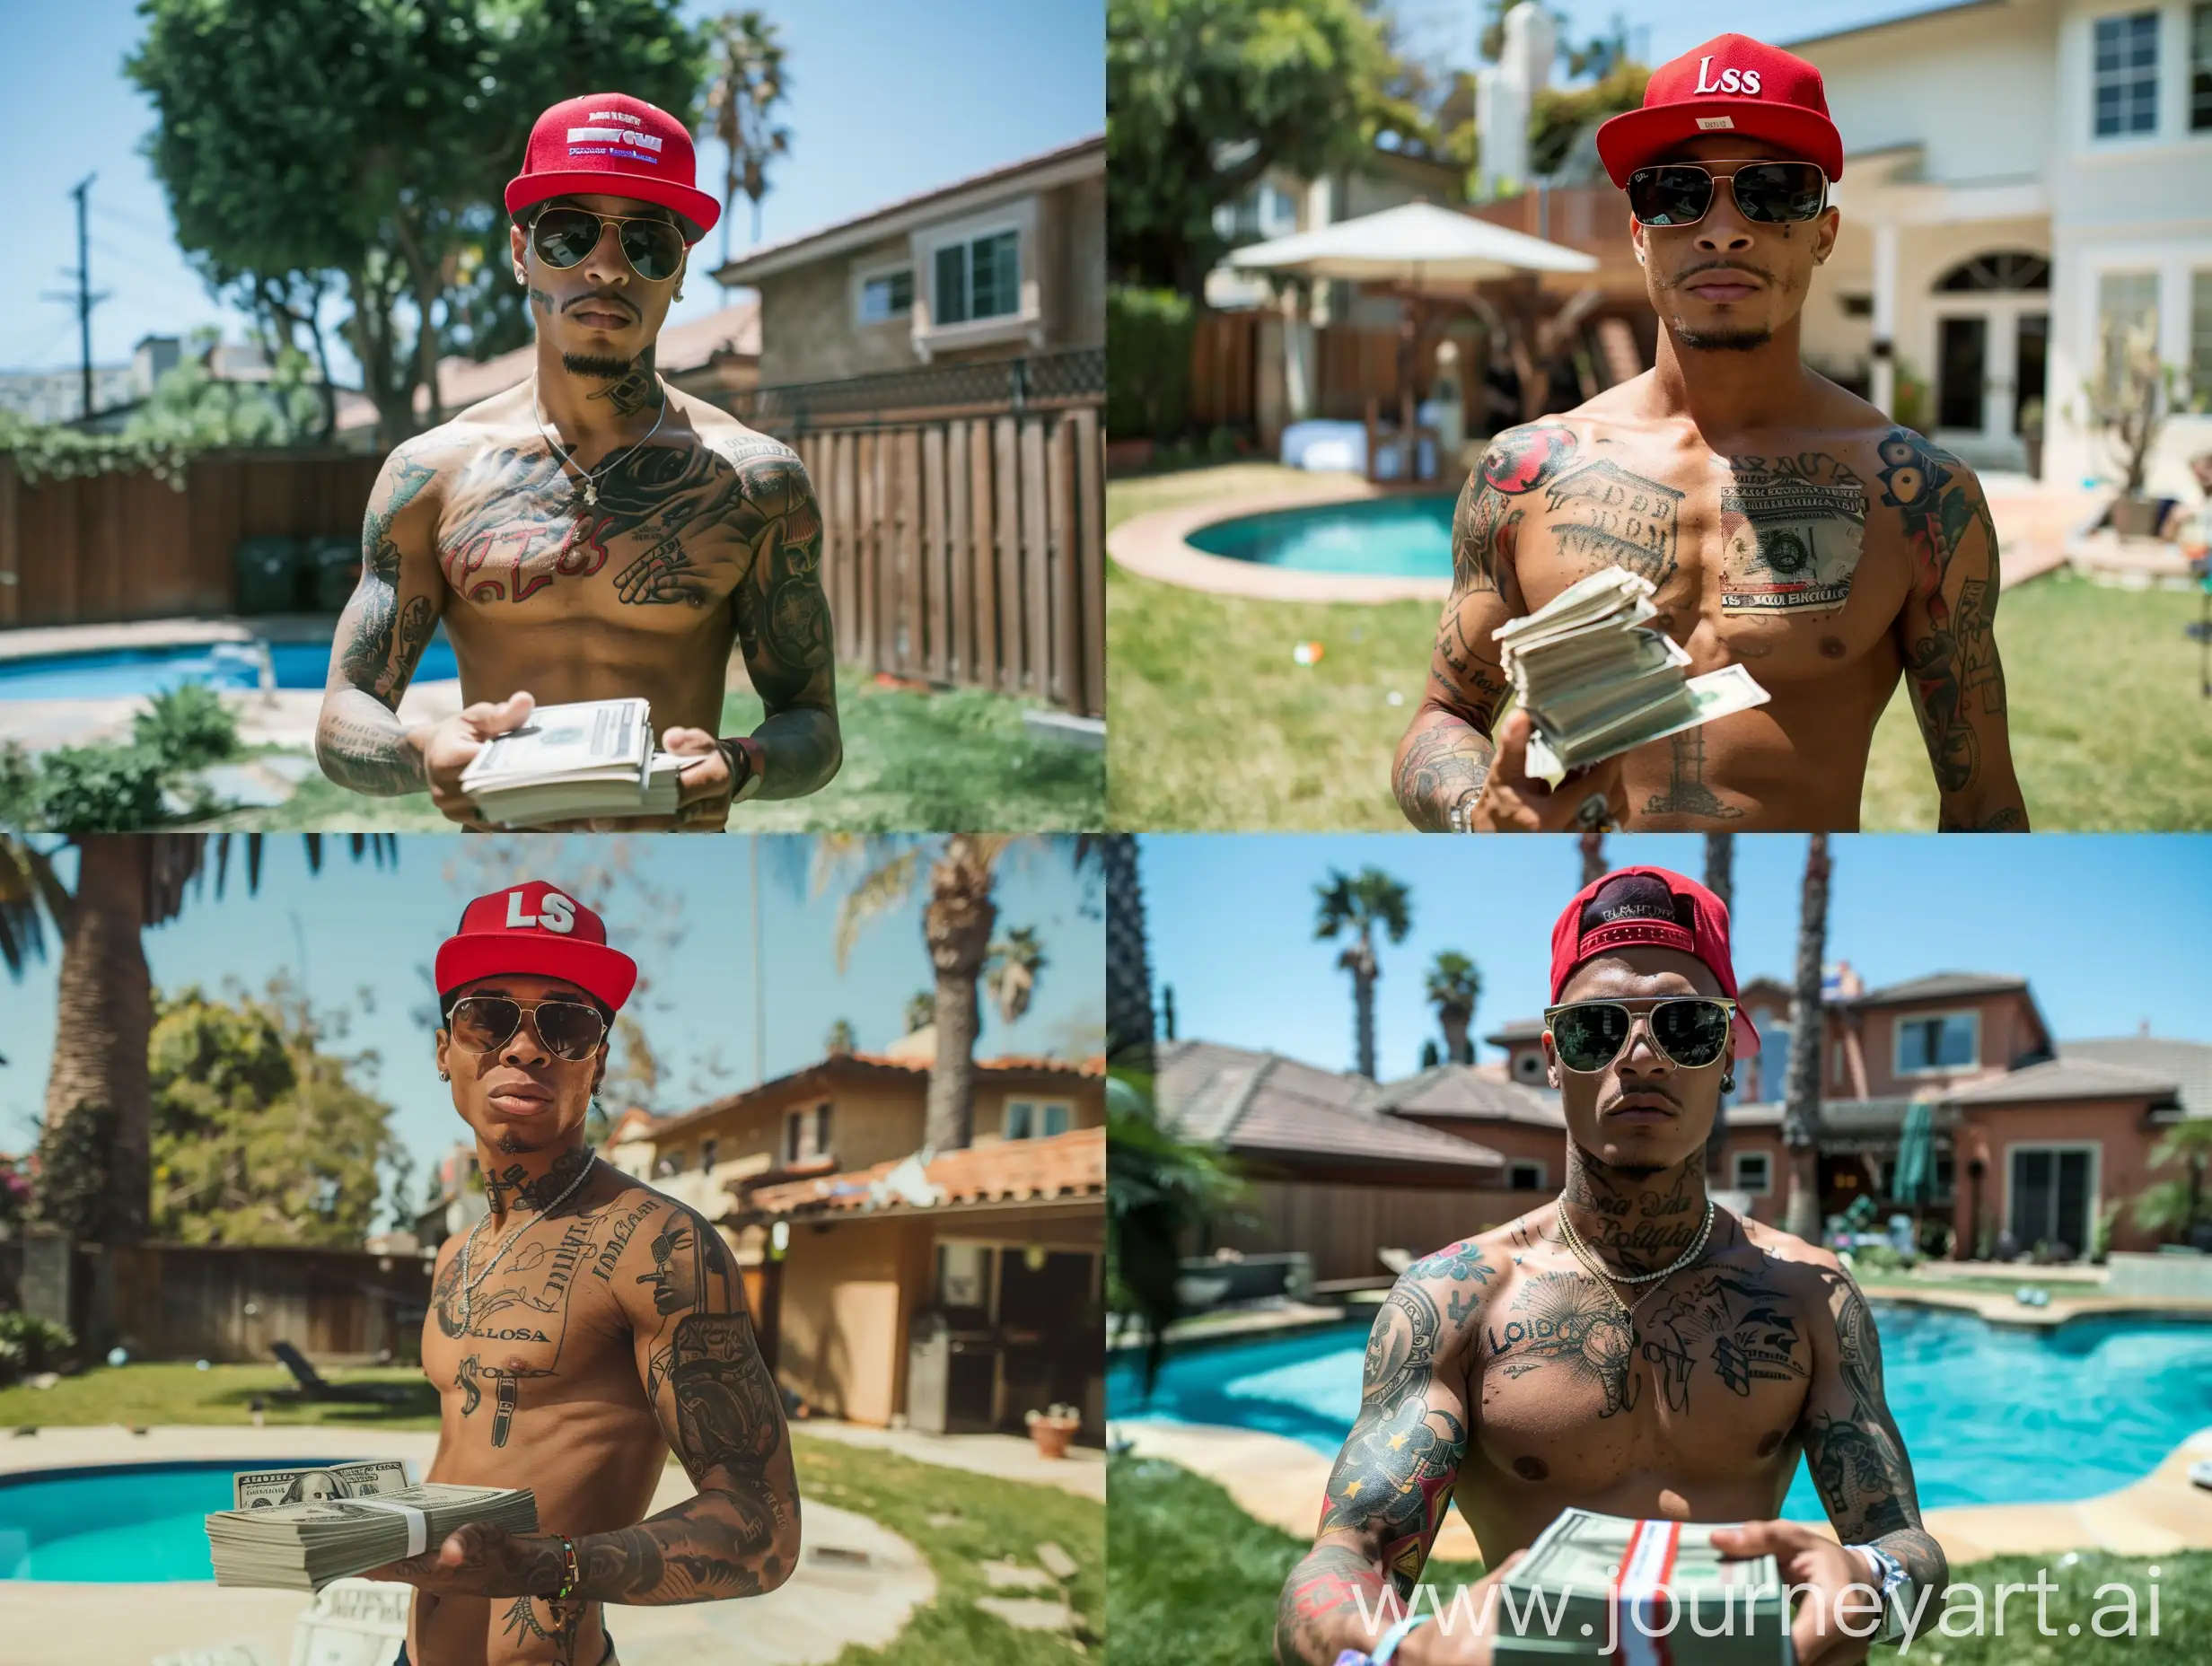 Very Handsome Brown skin male, with flat top sunglasses, Red Los Angeles hat forward, gang tattoos. standing in the backyard, of a California mansion, holding a stack of money